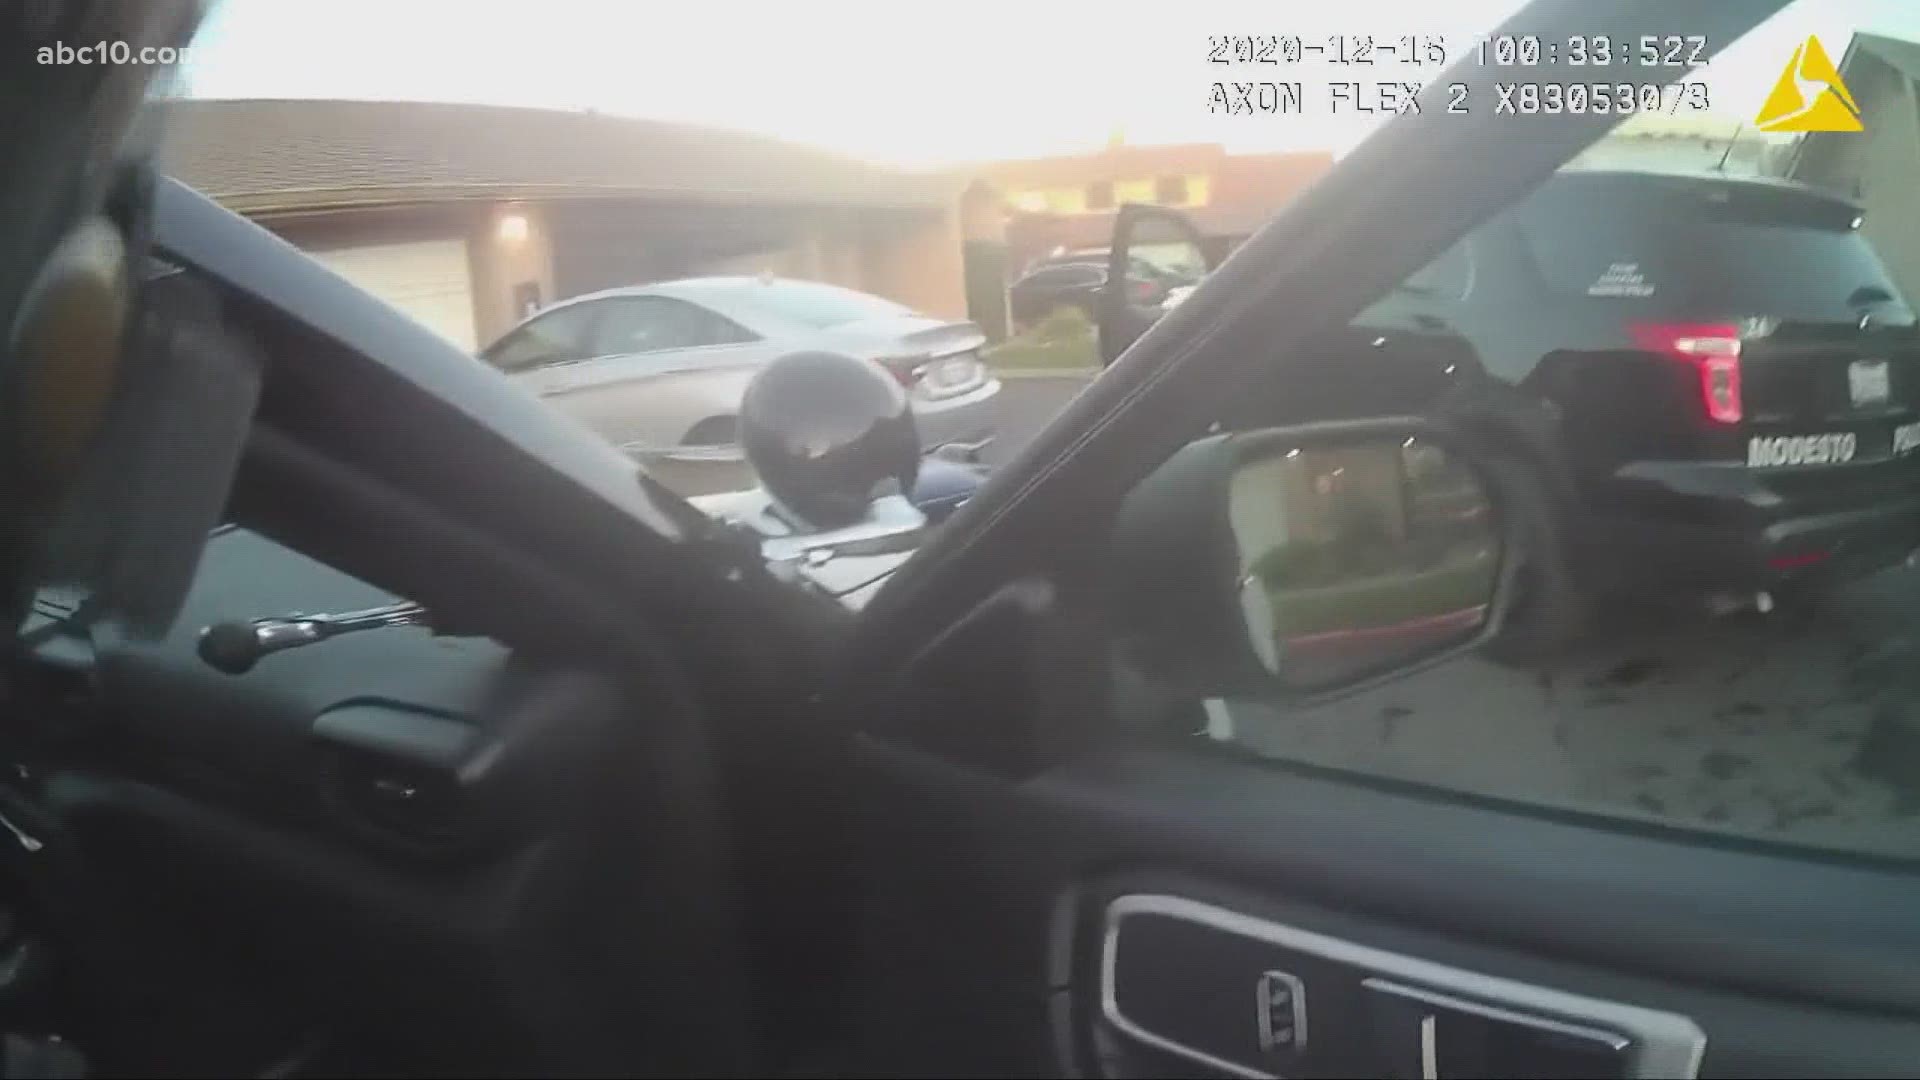 The bodycam video showed the moments where a suspect accused of grand theft fired about 100 rounds at officers, according to Modesto police.